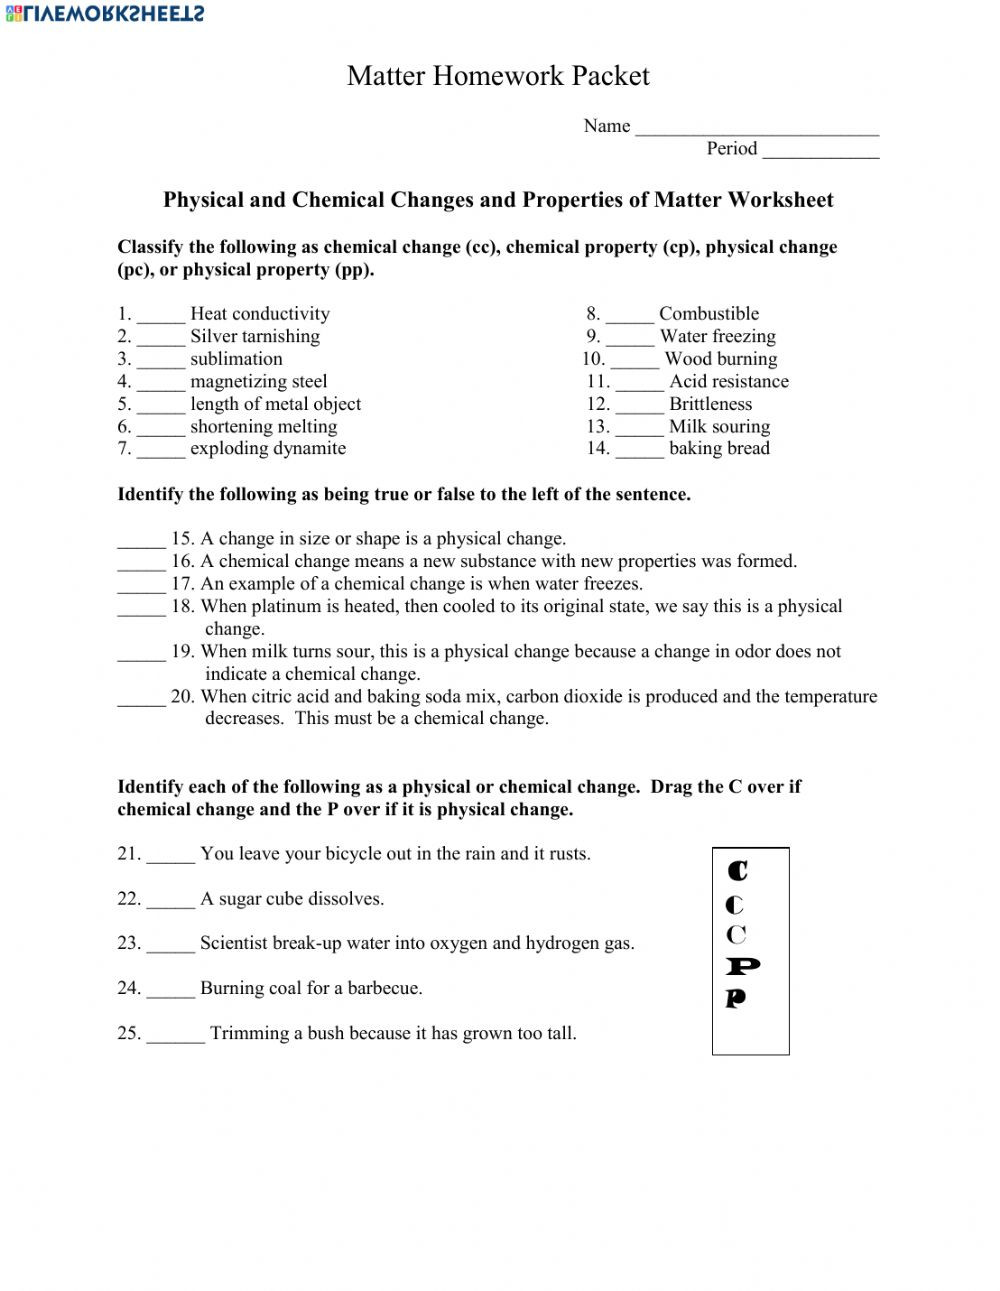 Classifying Matter Worksheet Answer Key Properties and Changes Of Matter Interactive Worksheet